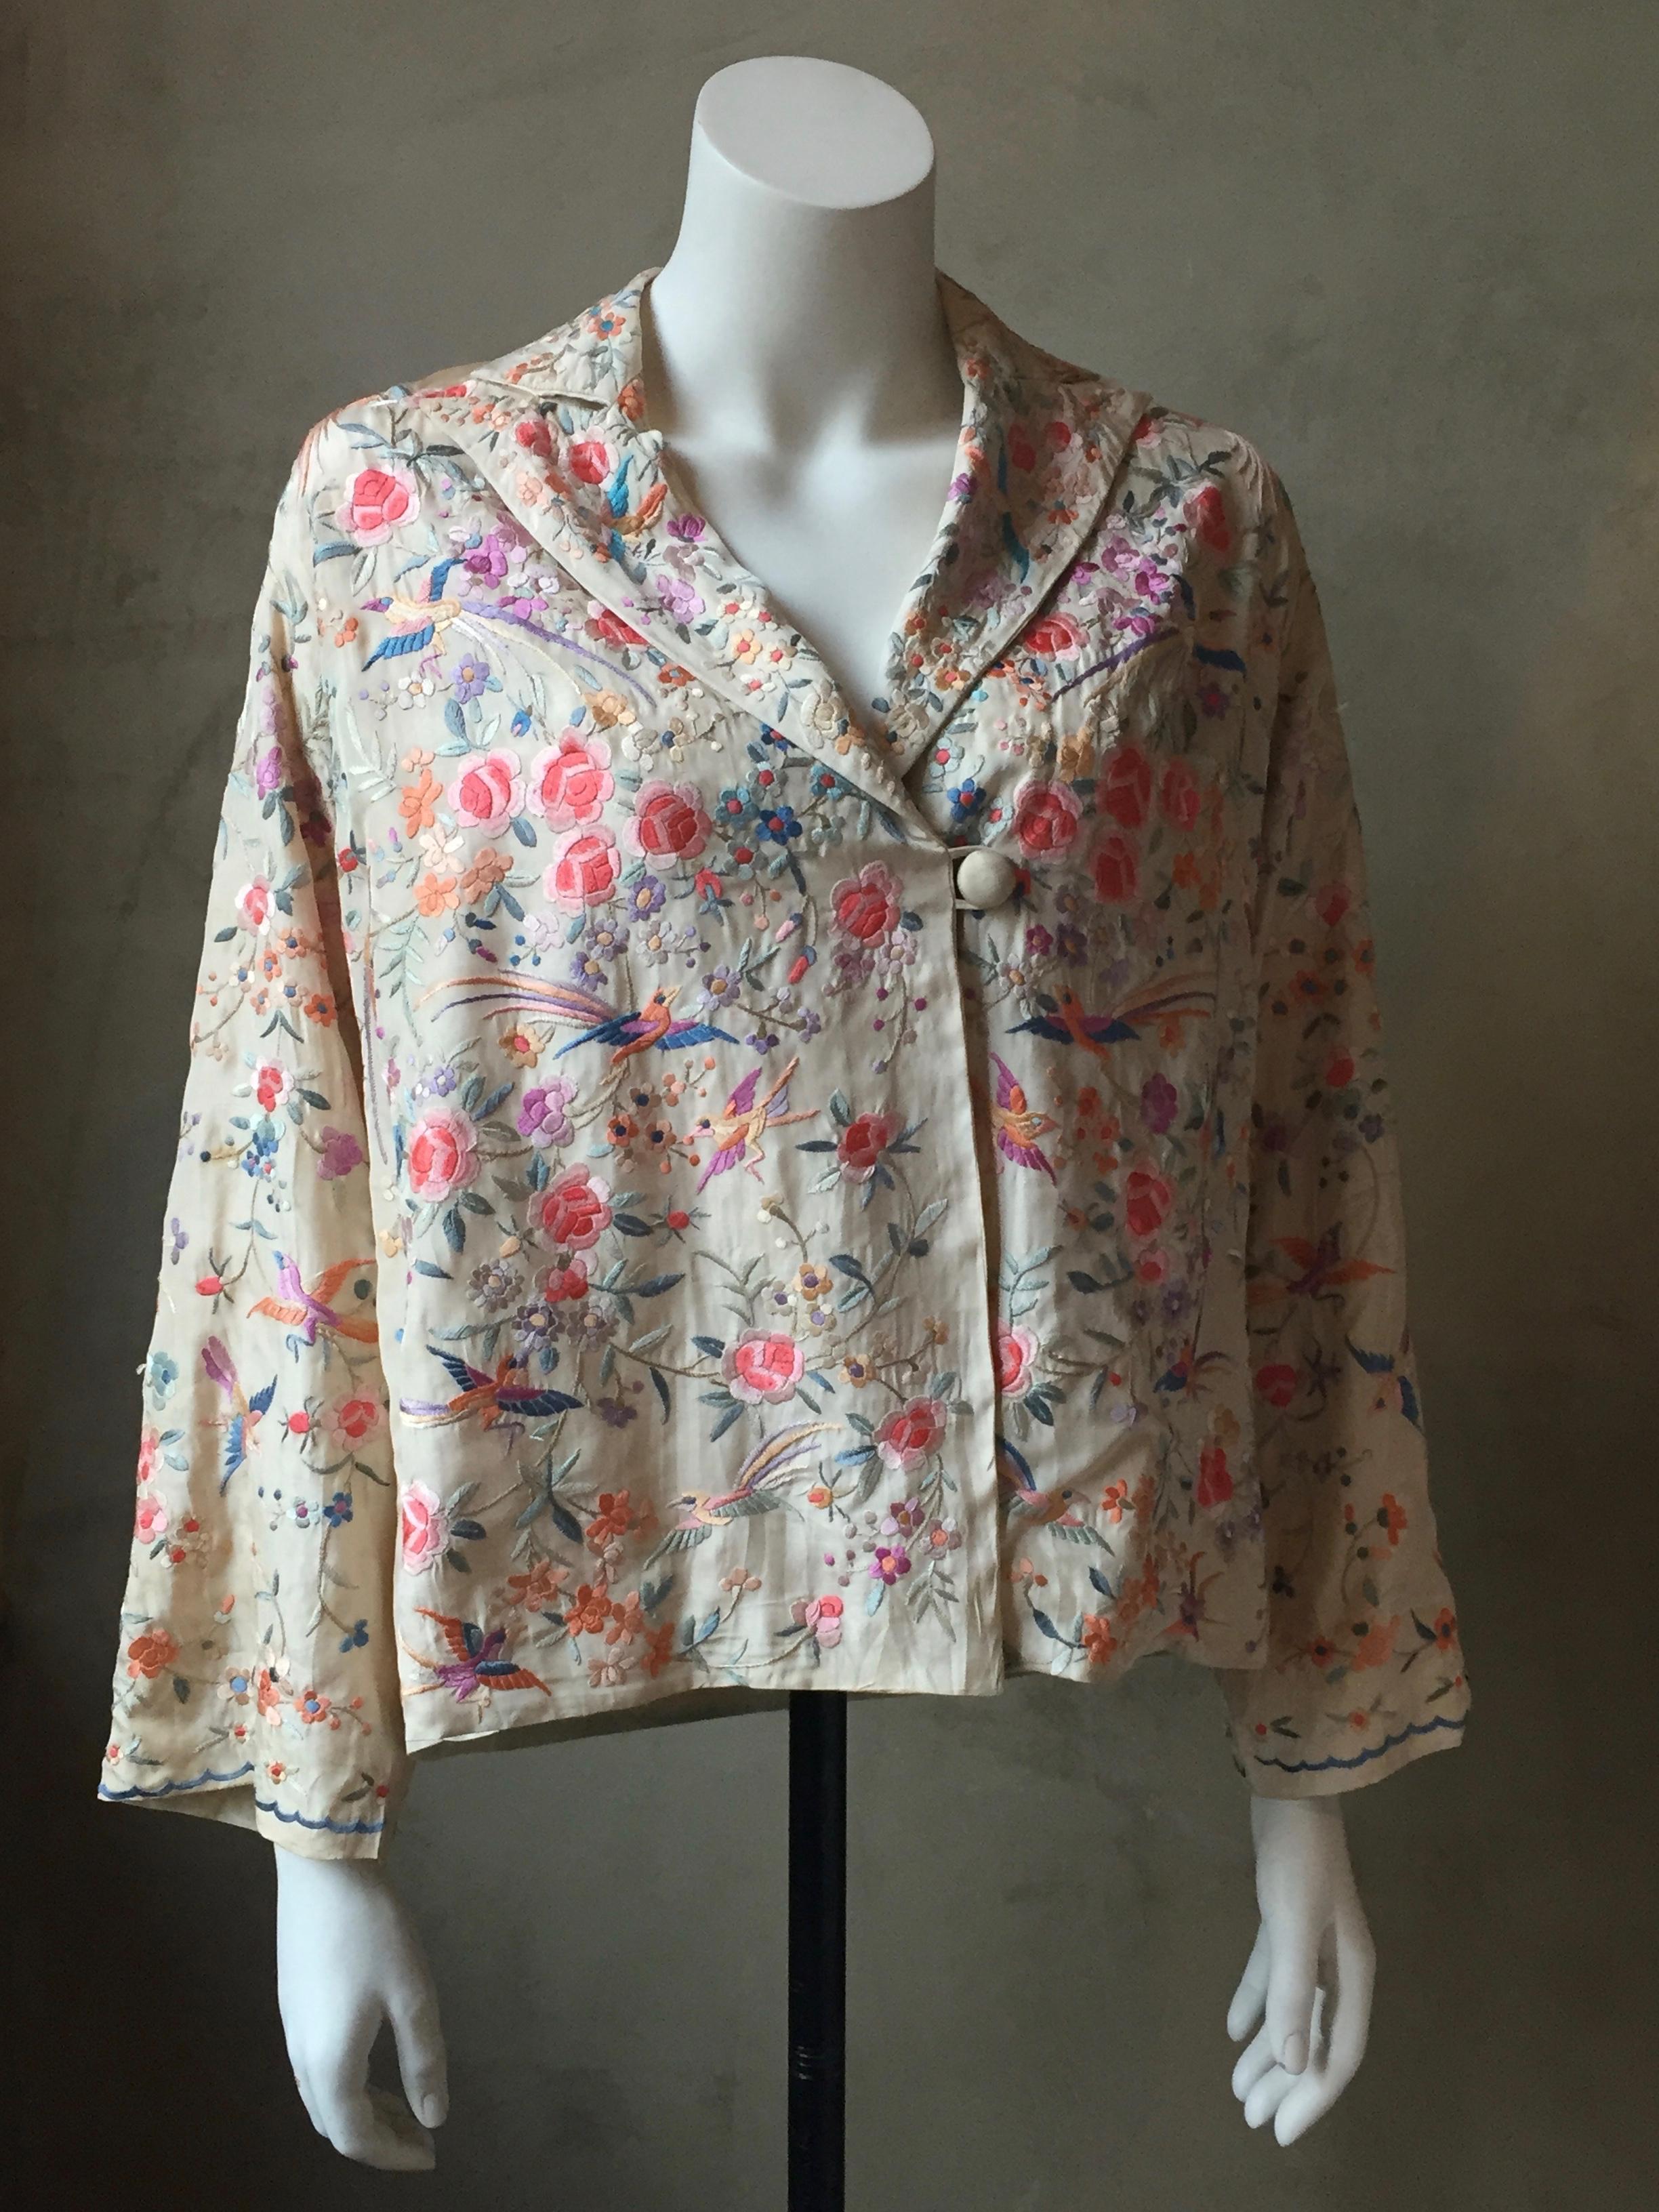 Lovely Cantonese Ivory silk jacket hand embroidered in pastel shades of silk floss .
Made Canton china in a European style to suit the taste of a most elegant lady in the 1920's.
Fully lined in silk crepe. 
shoulder width(slightly dropped shoulder